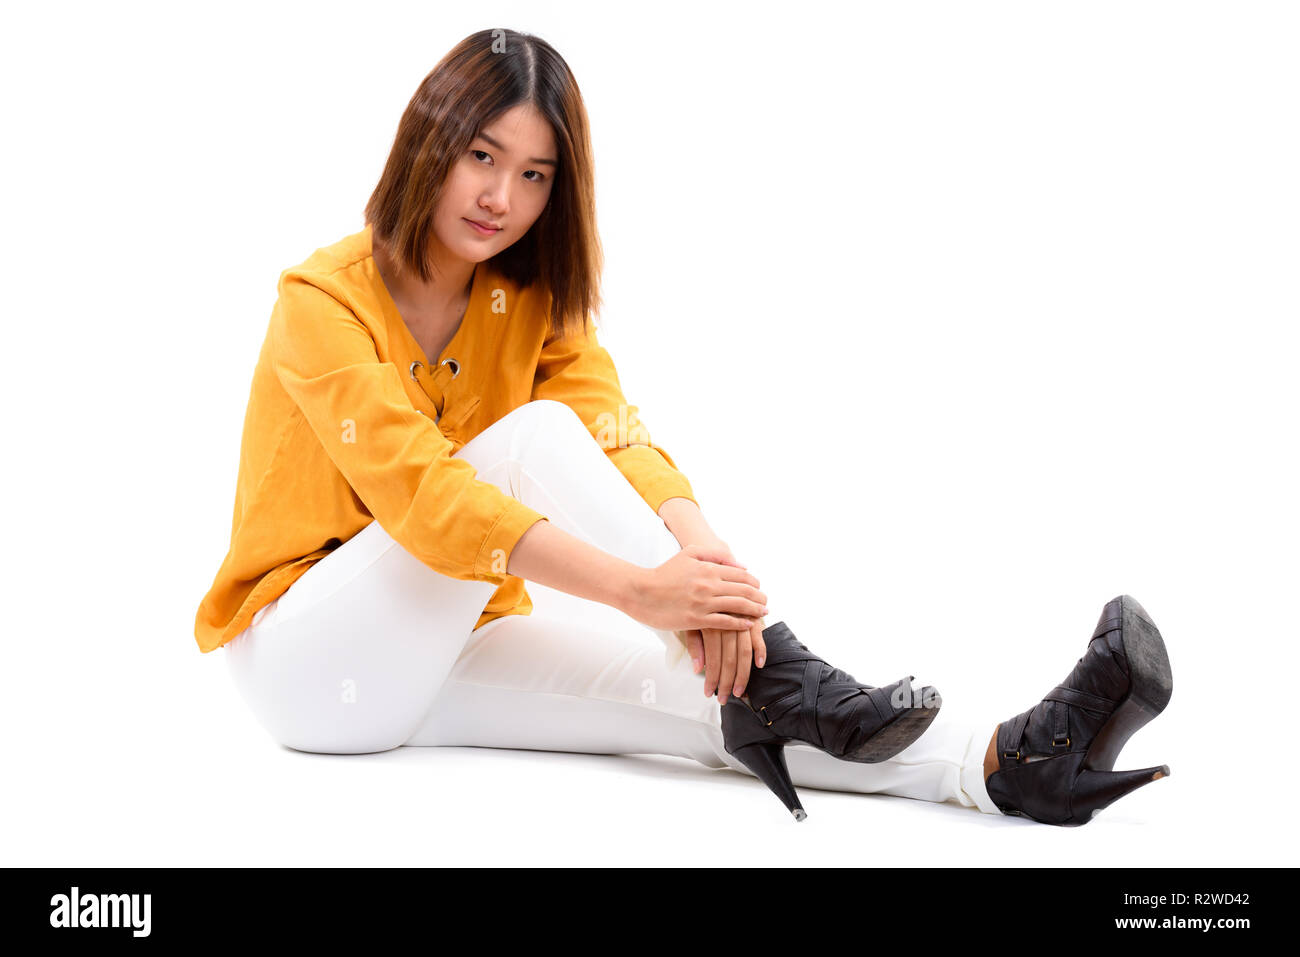 Studio shot of young beautiful Asian woman sitting on the floor Banque D'Images